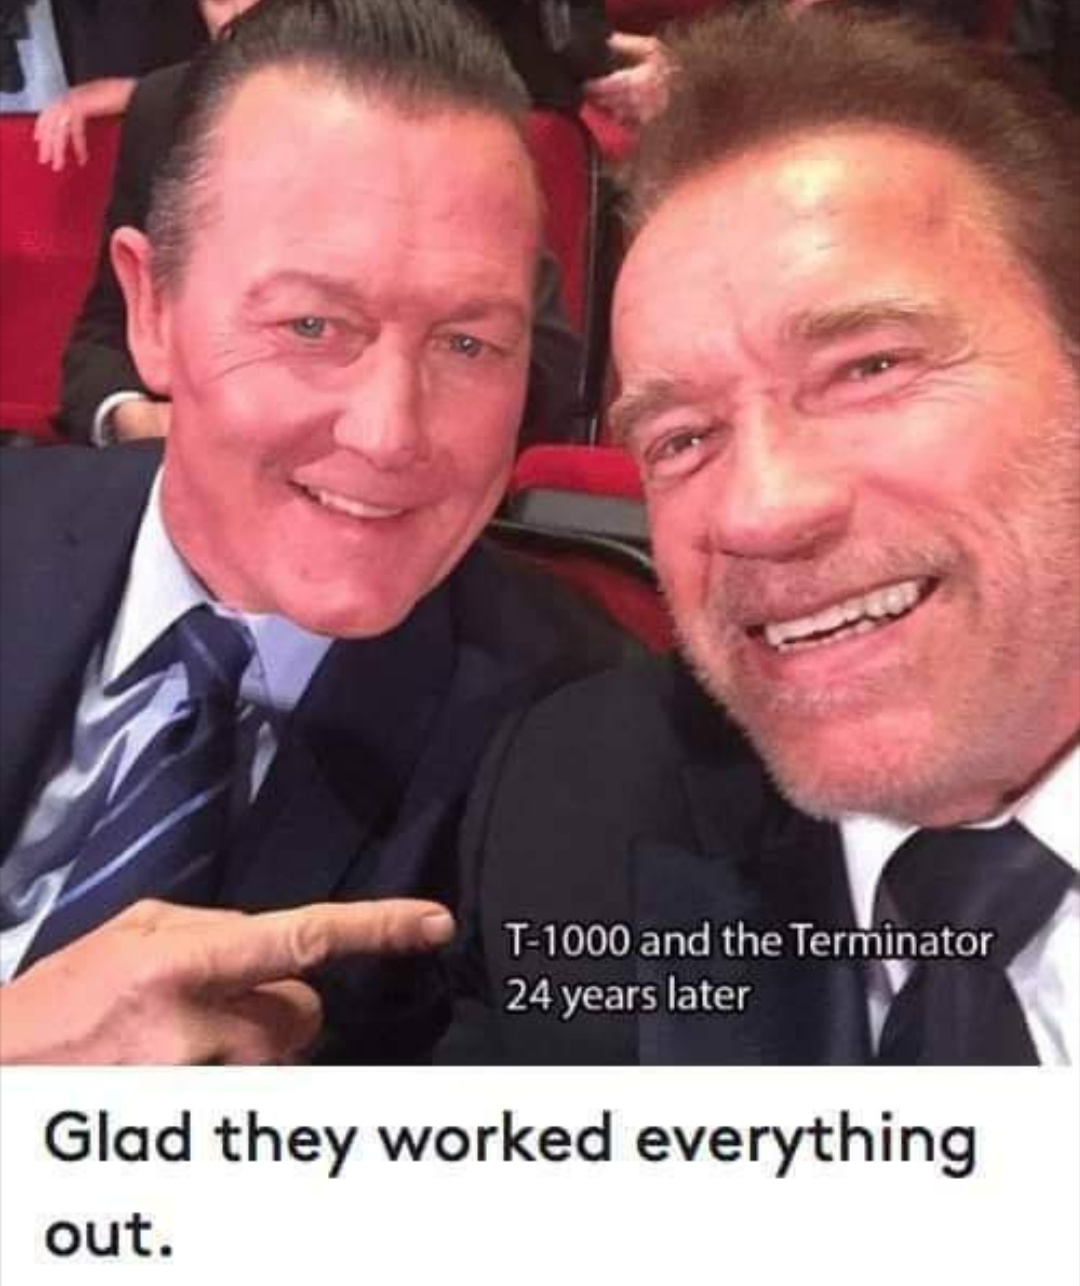 terminator 2 reunion - T1000 and the Terminator 24 years later Glad they worked everything out.